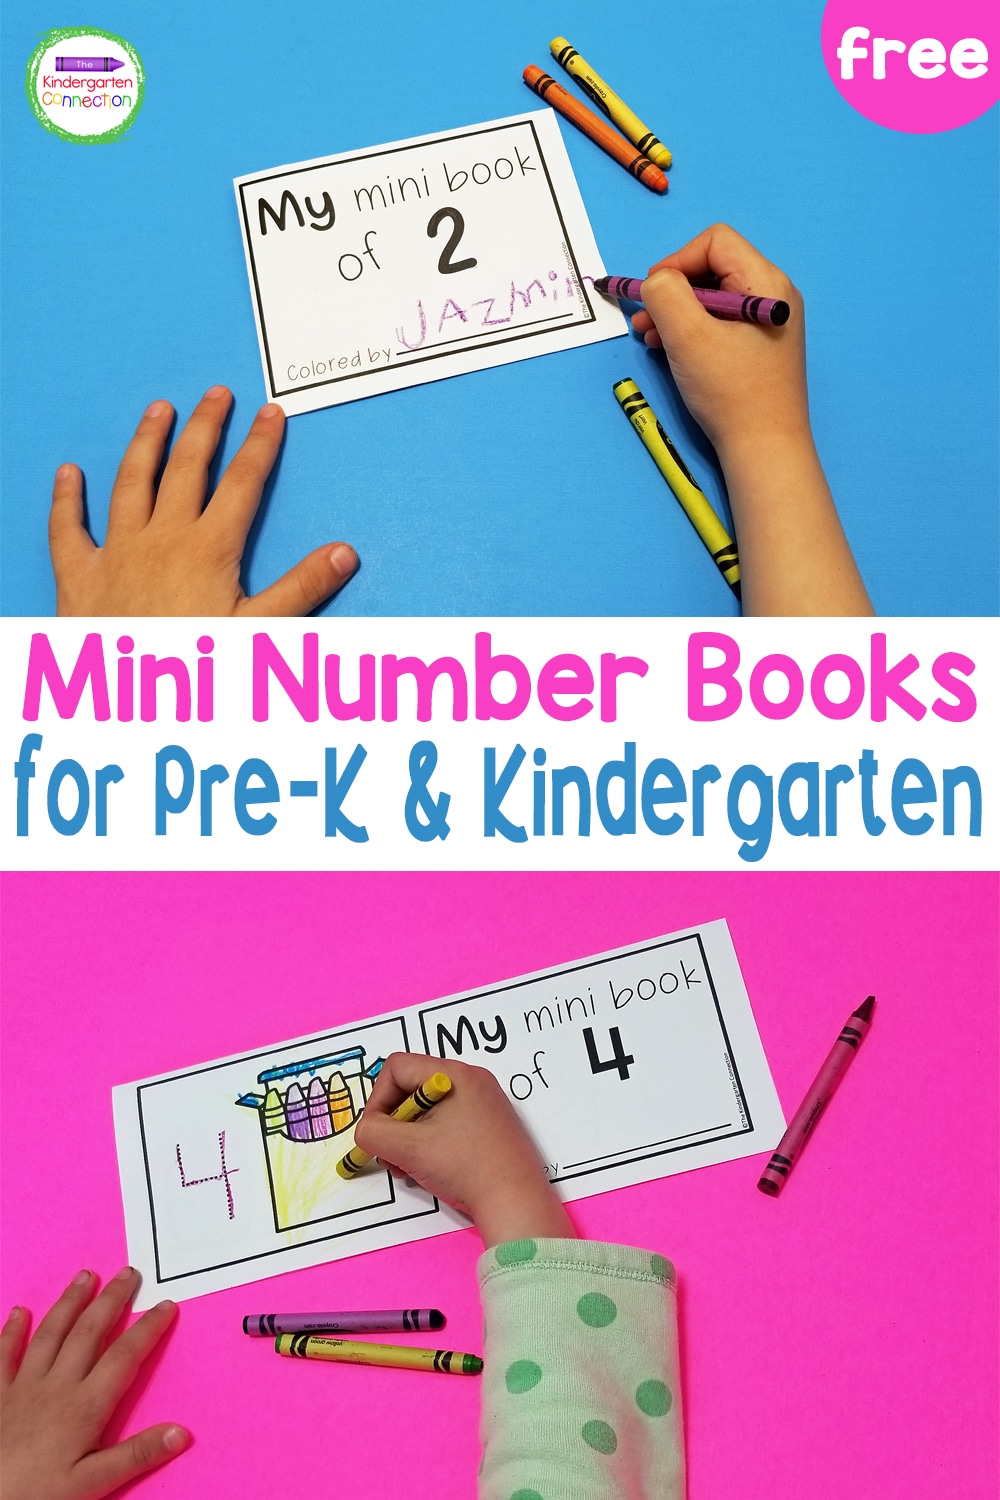 These FREE Printable Number Mini-Books for Pre-K & Kindergarten are a perfect extension activity for numbers and counting in a fun way!